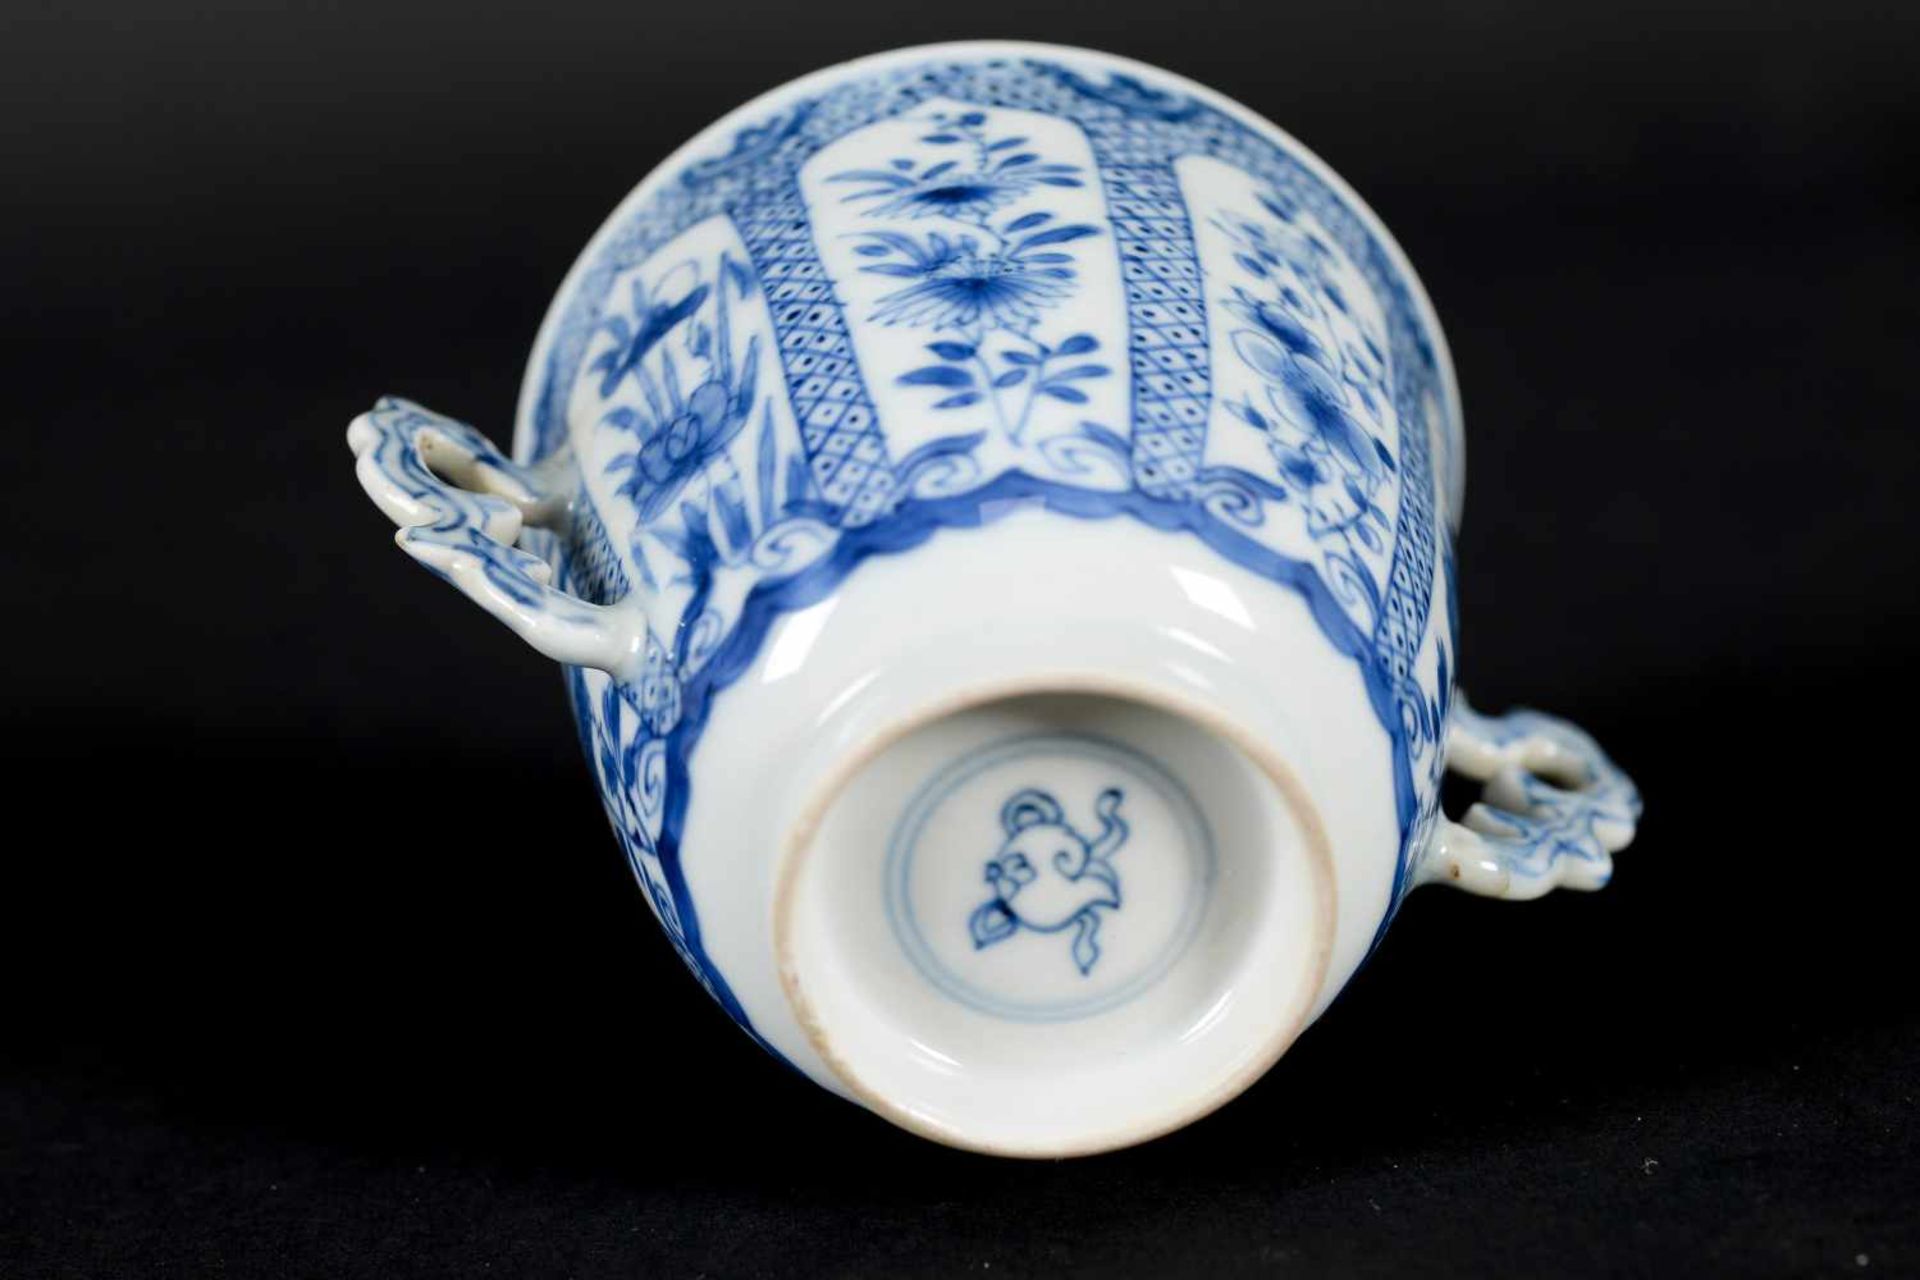 A blue and white porcelain lidded cup with two handles on a deep saucer, decorated with flowers. - Image 9 of 9